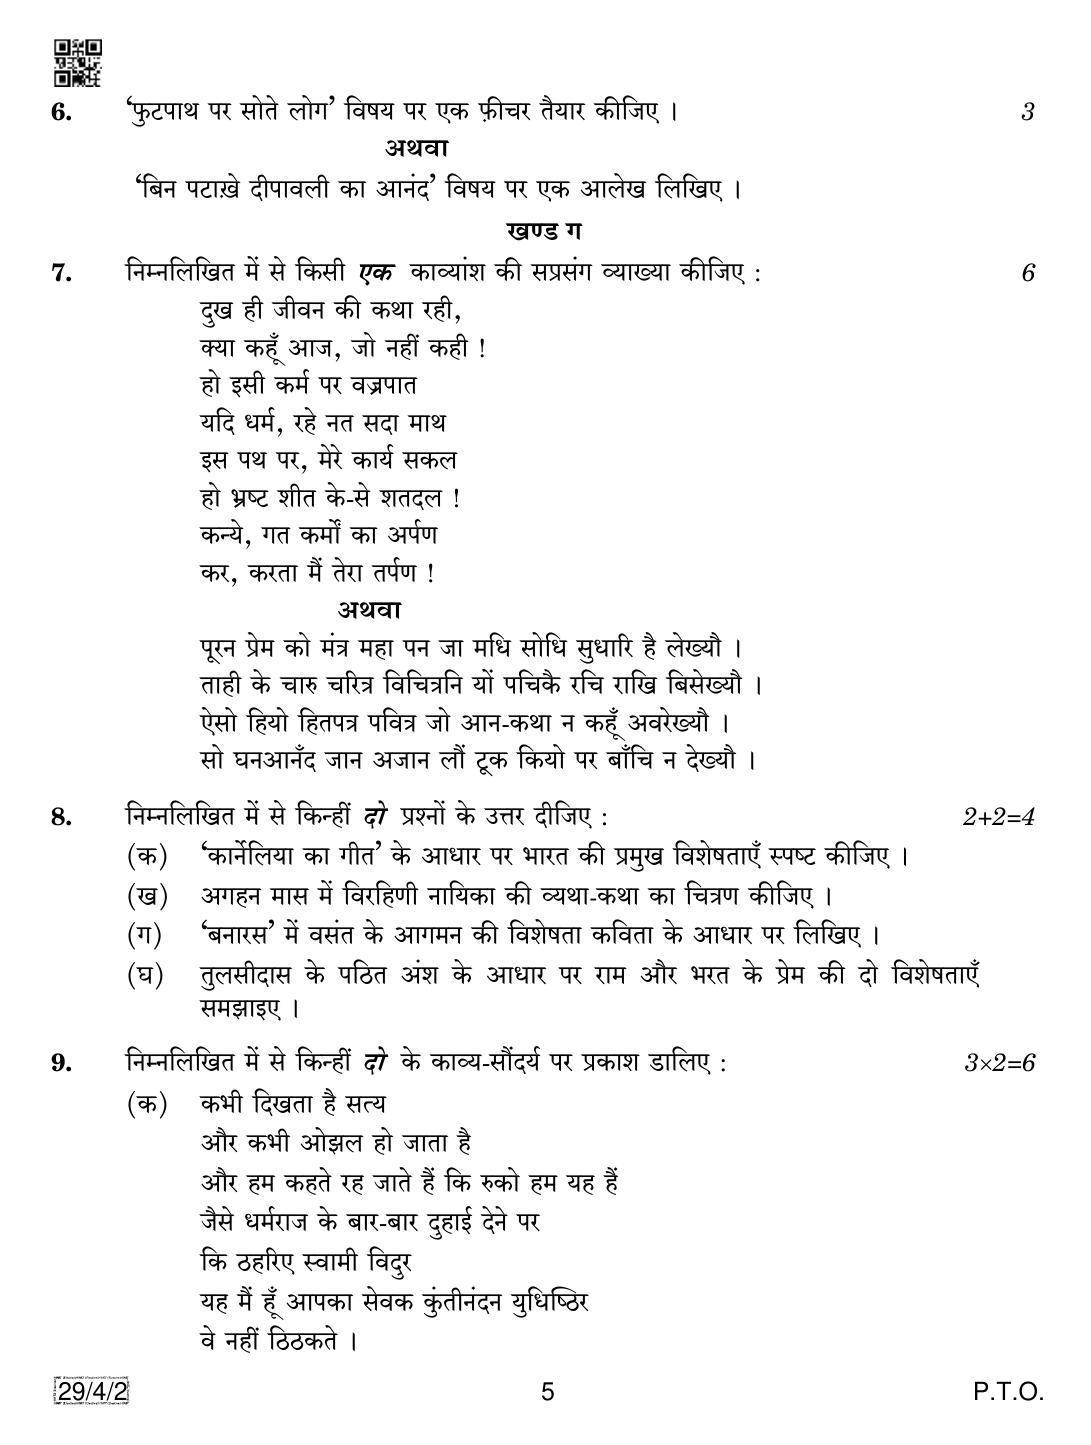 CBSE Class 12 29-4-2 Hindi Elective 2019 Question Paper - Page 5